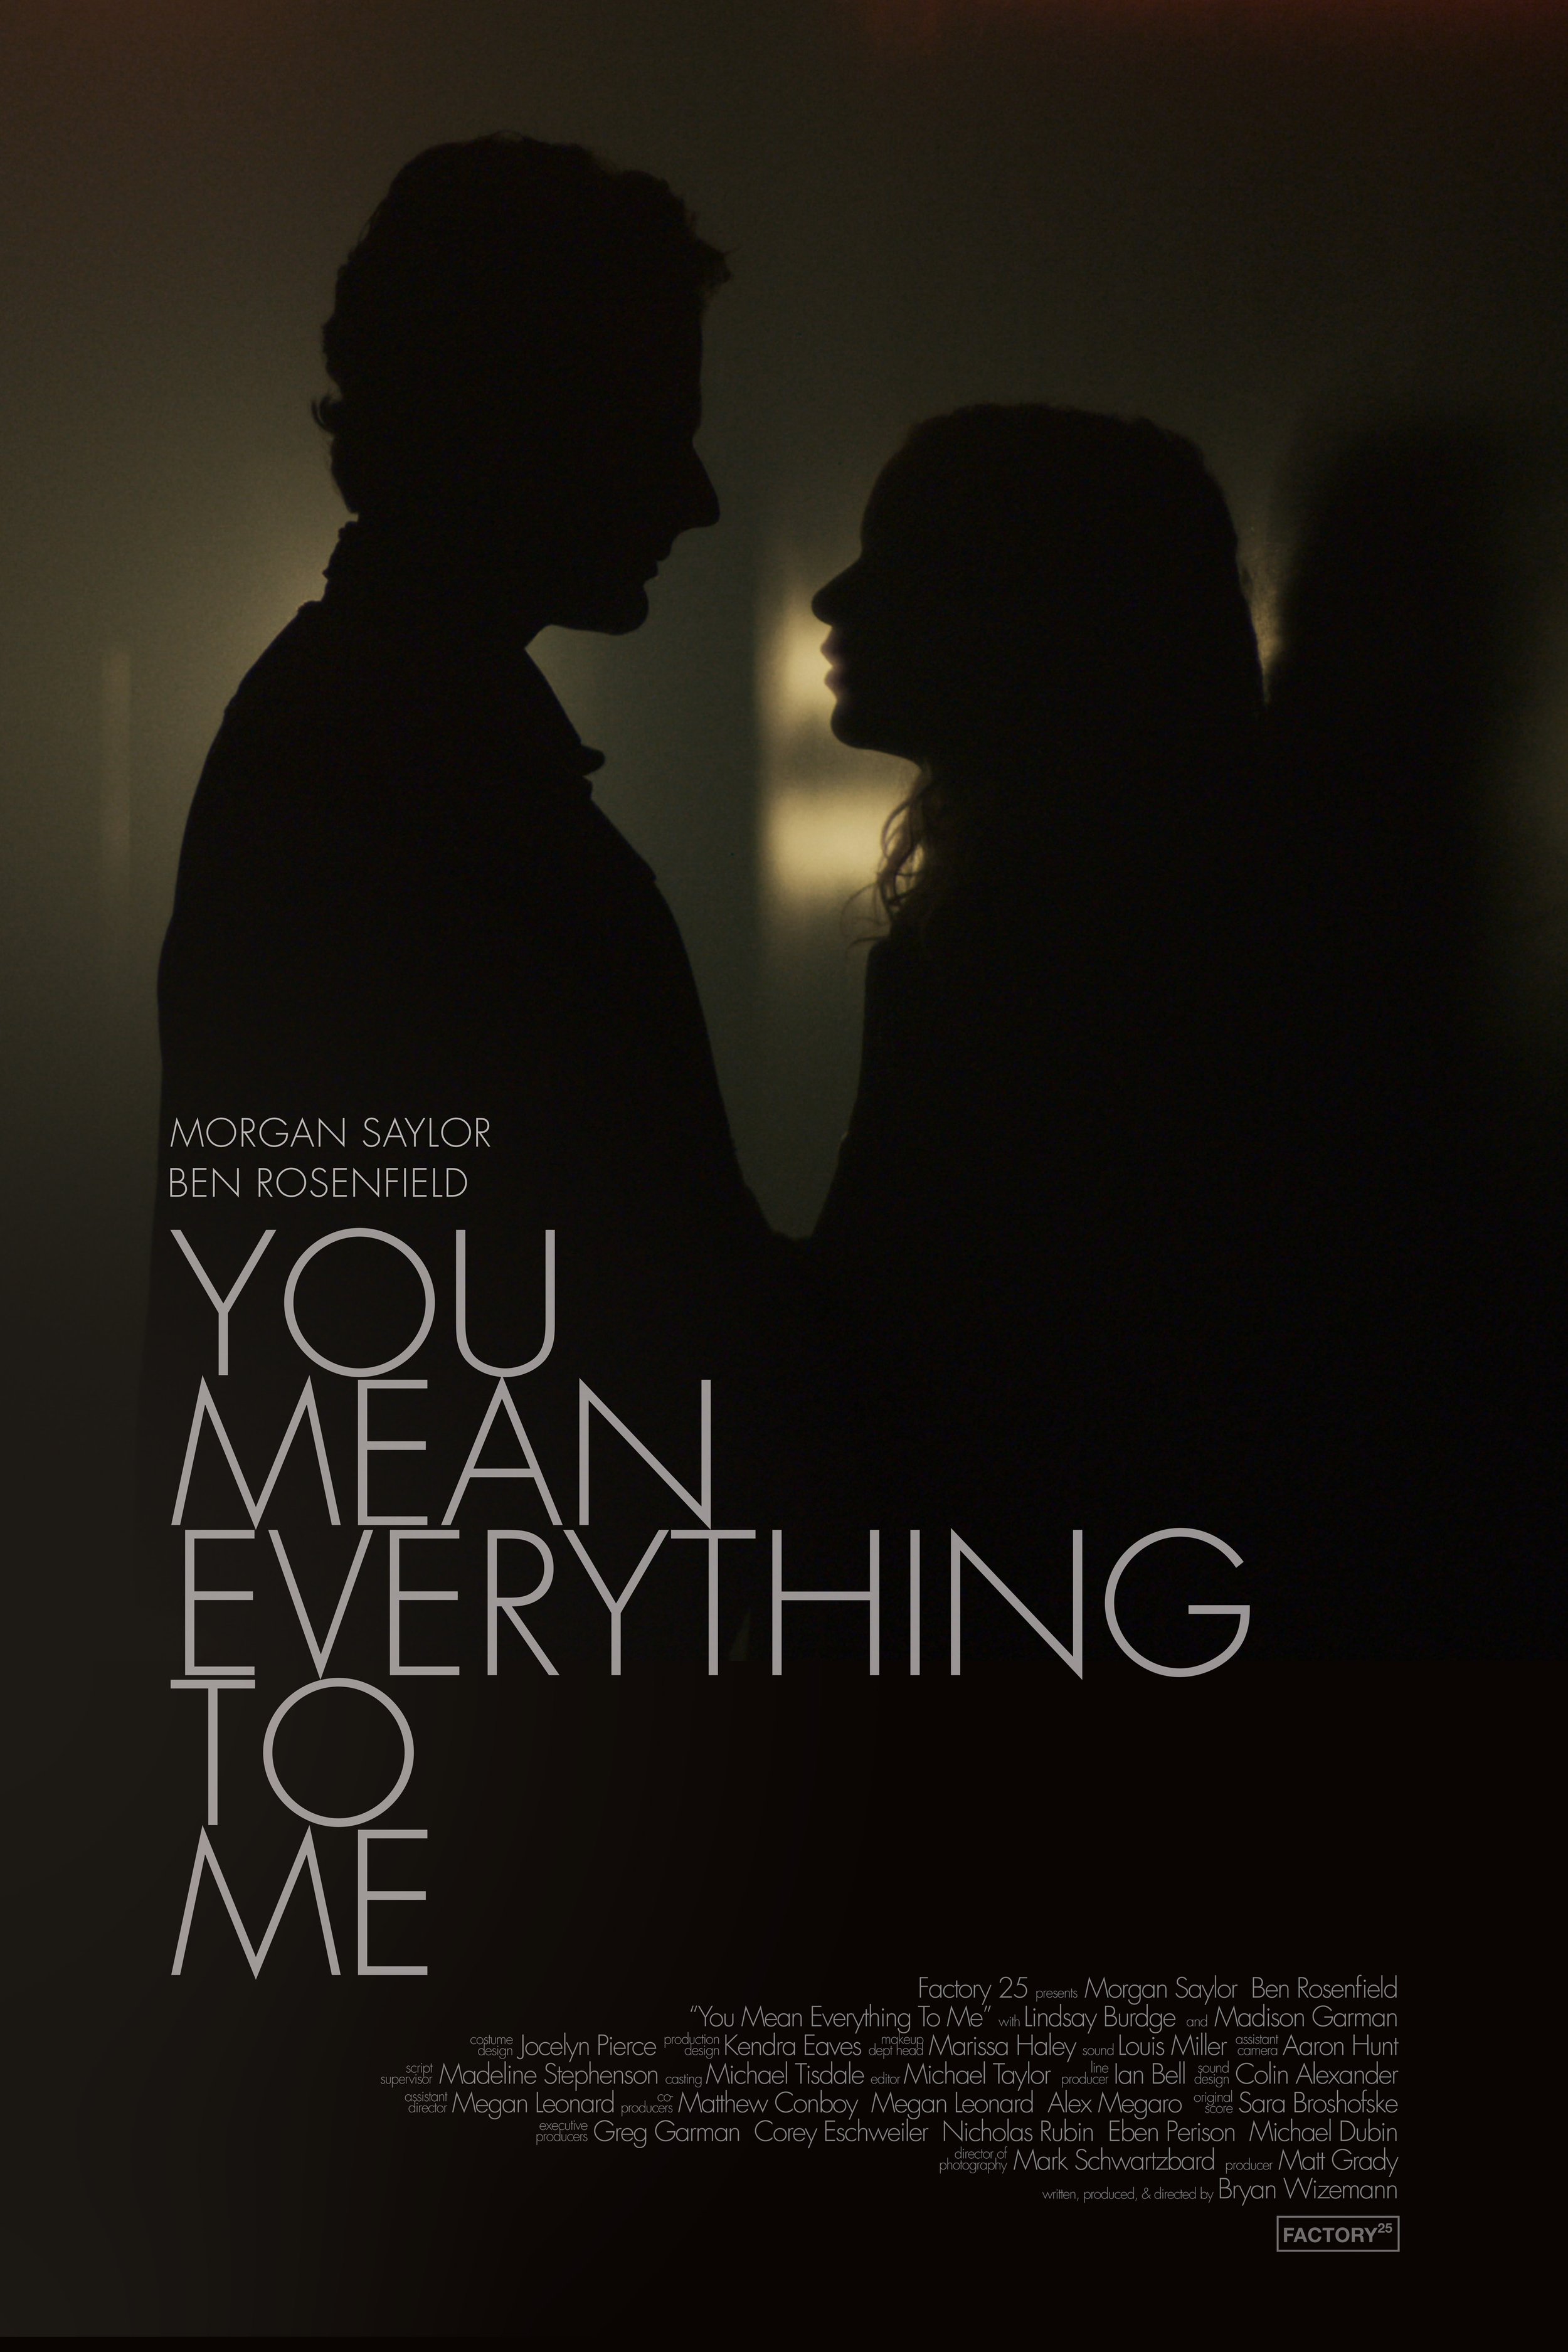 YOU MEAN EVERYTHING TO ME /// BRYAN WIZEMANN